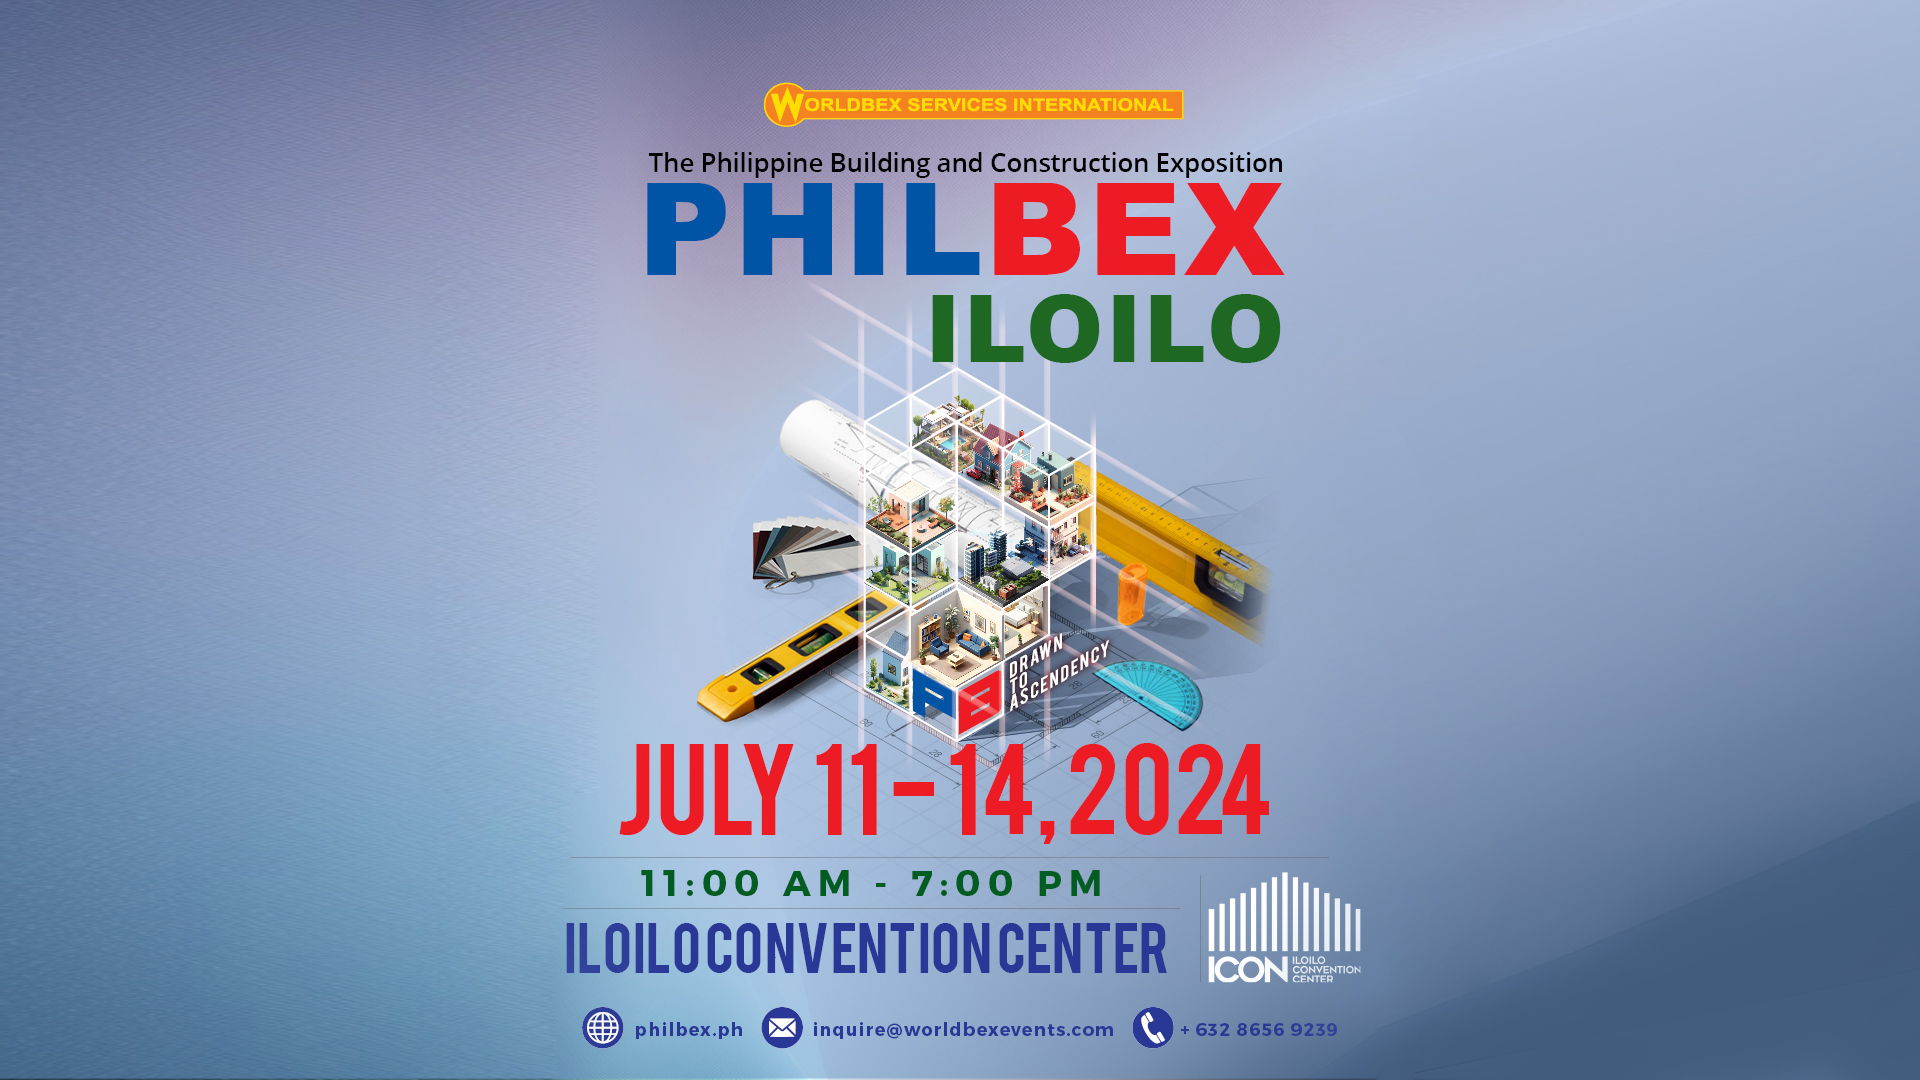 Get ready for world-class expositions headed to Iloilo City!